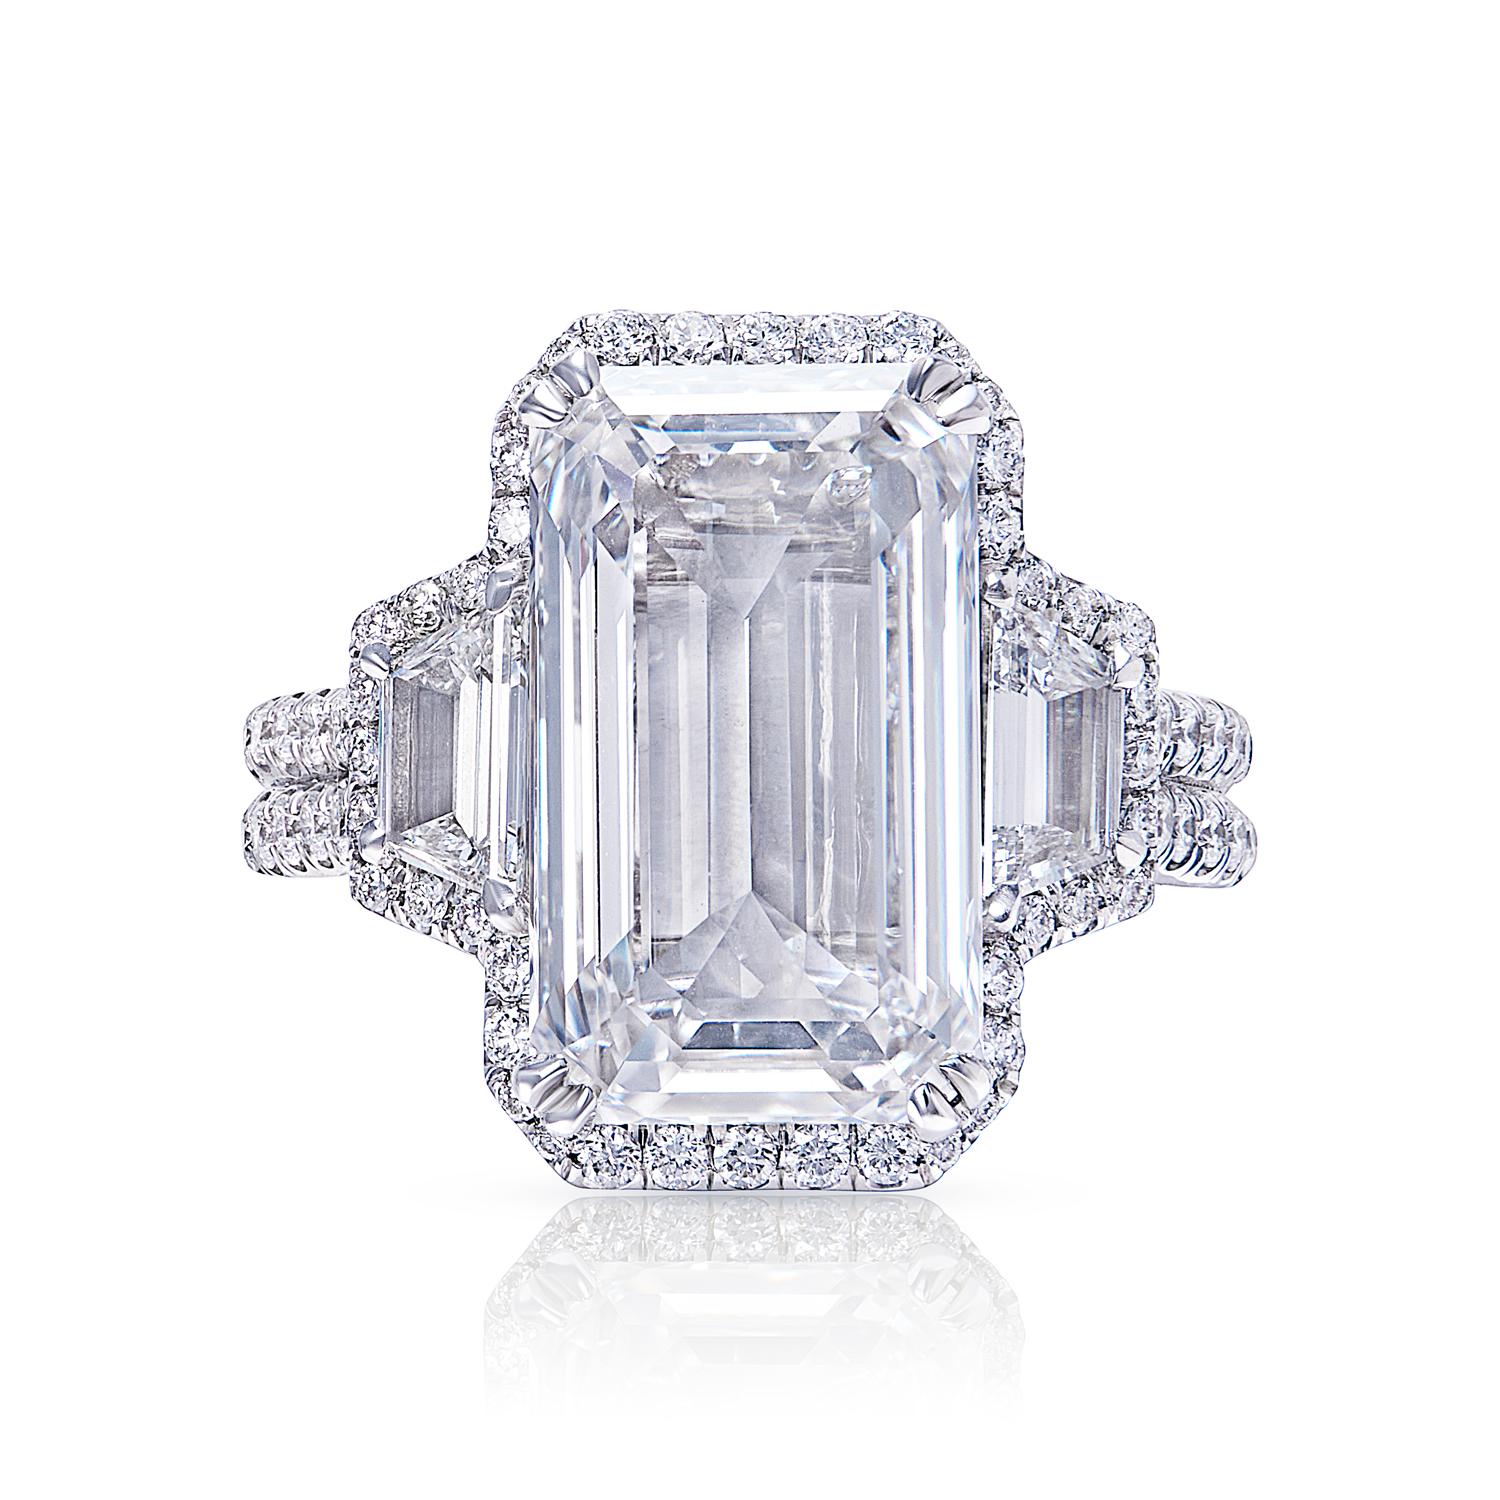 An emerald-cut diamond ring is a classic and sophisticated choice that will never go out of style. The rectangular shape of the emerald-cut diamond is unique and eye-catching, and the slender, tapered fingers of the setting show off the diamond to